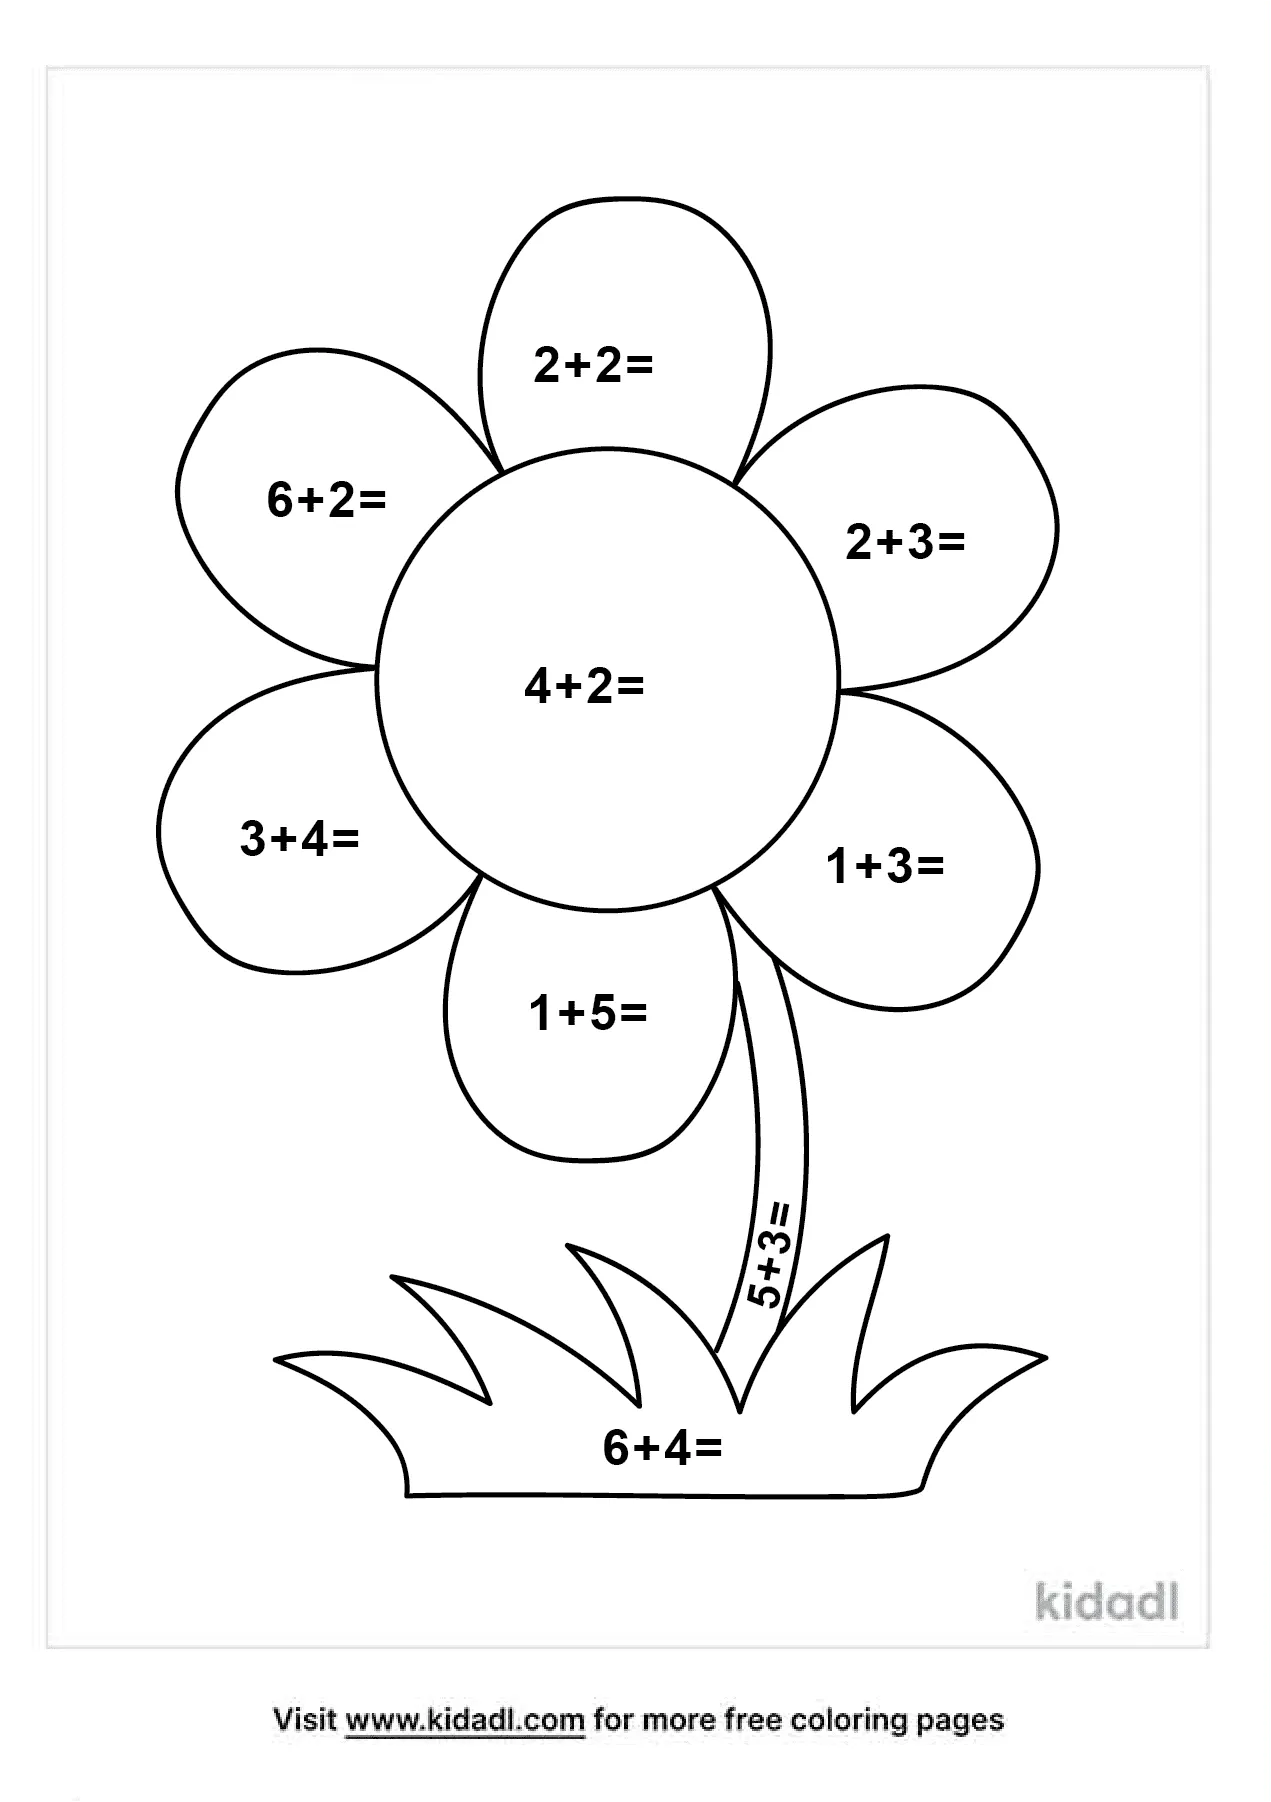 math coloring pages free numbers coloring pages kidadl